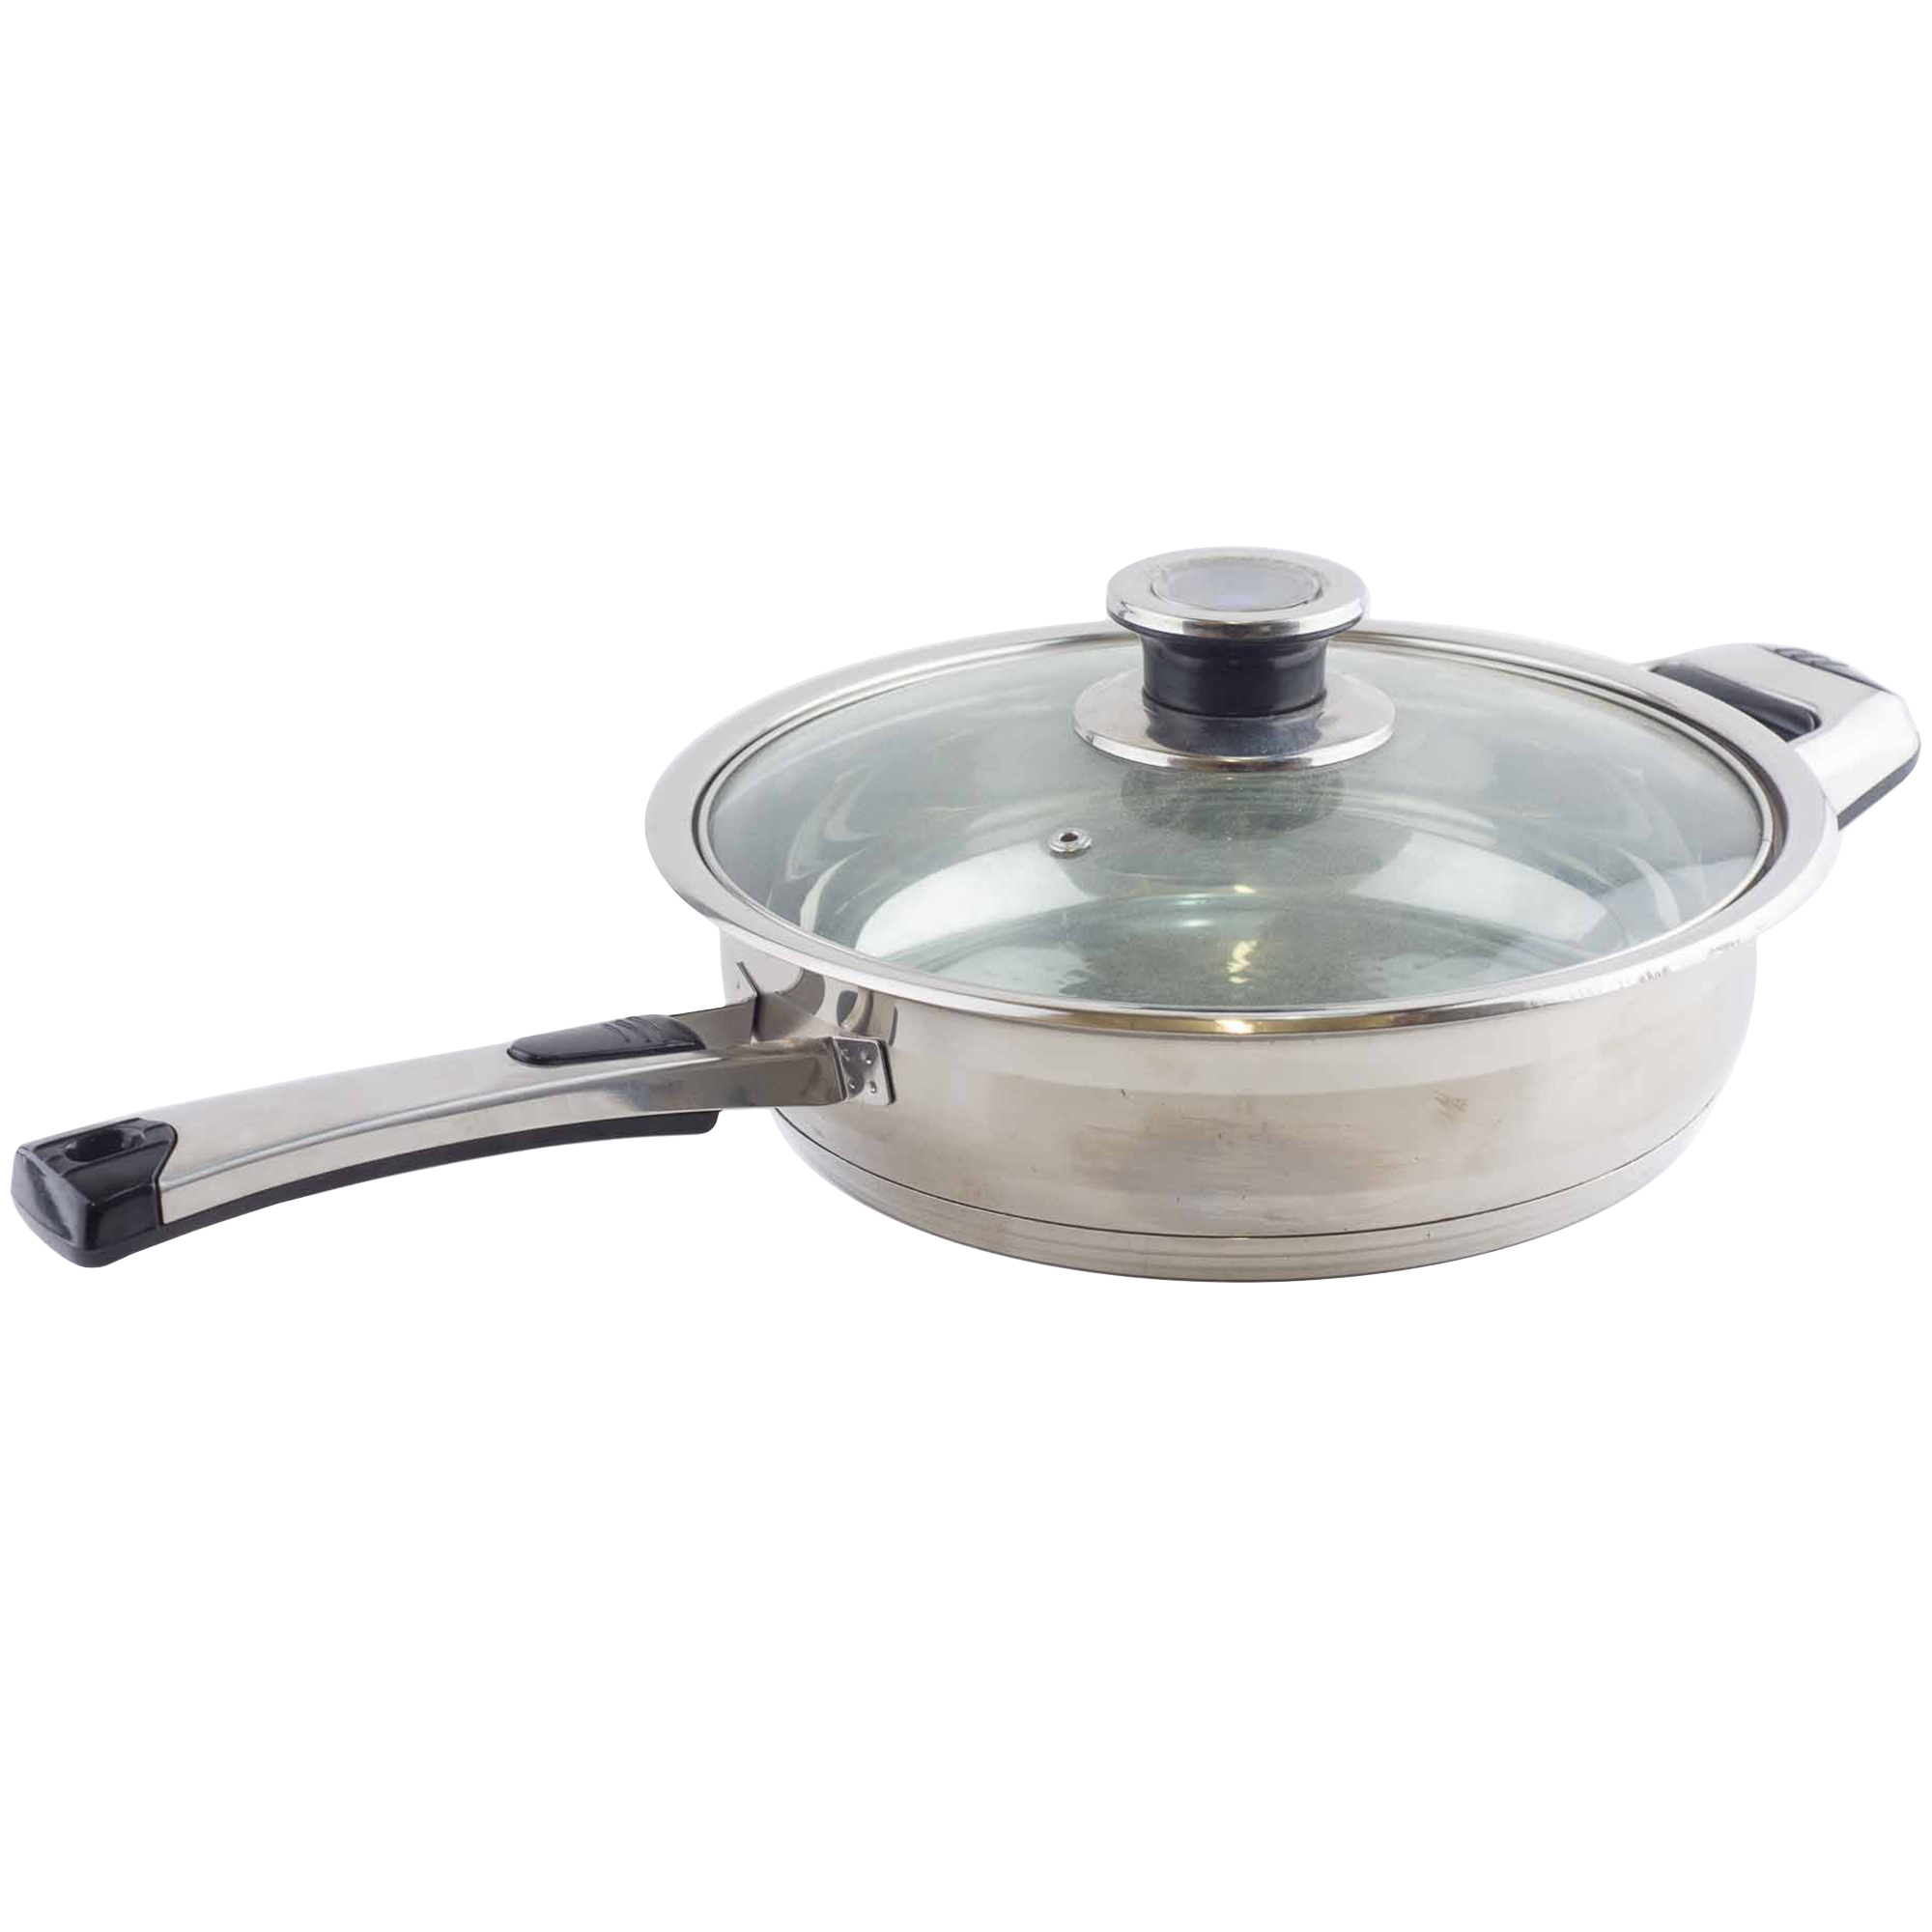 stainless steel saute pan with lid